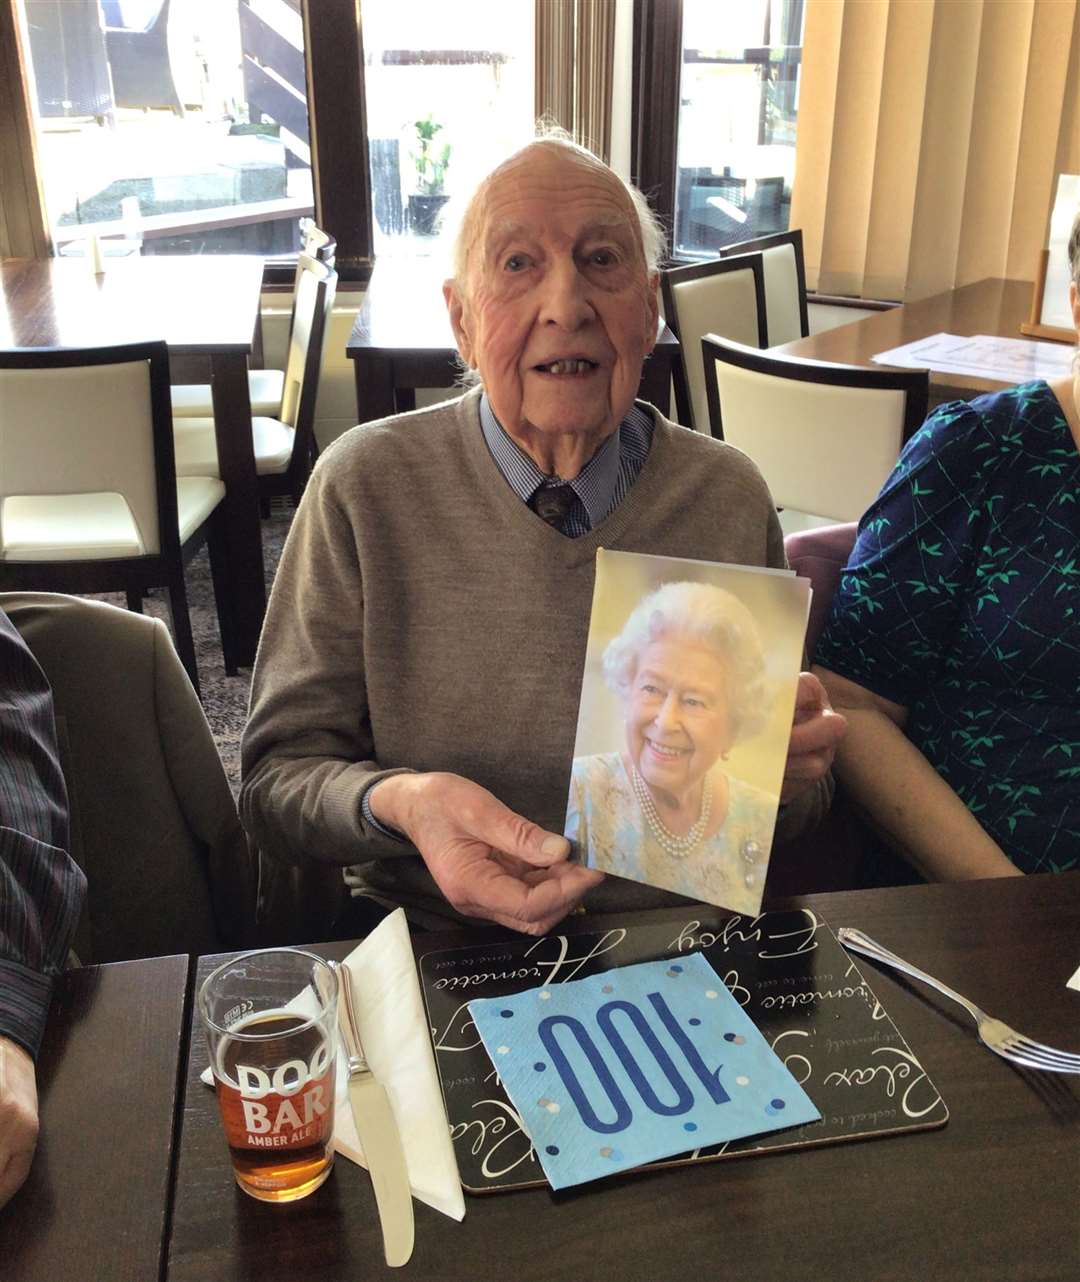 Lenard Warnett celebrates his 100th birthday with a card from the Queen, at the Poult Wood Golf Club in Tonbridge